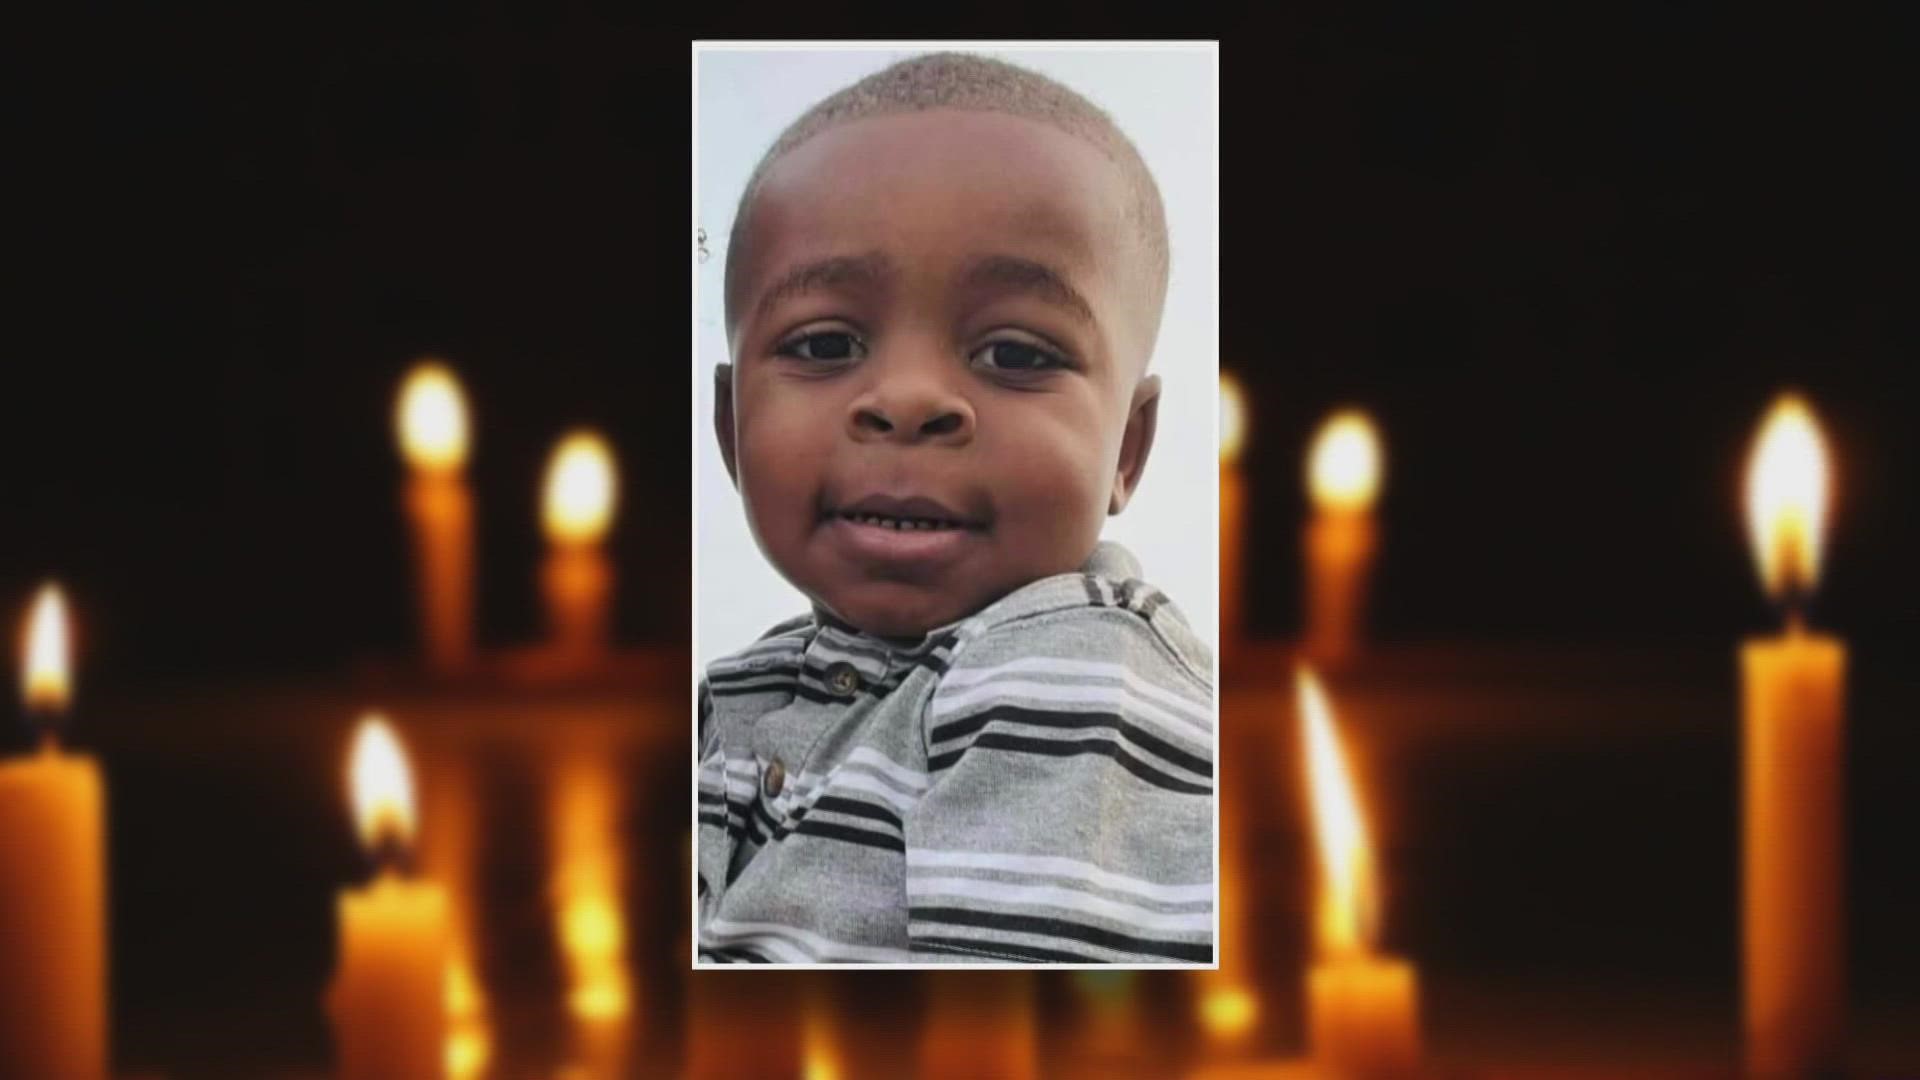 Two-year-old Ezekiel Harry was brutally murdered. More details are coming out on this tragic case.